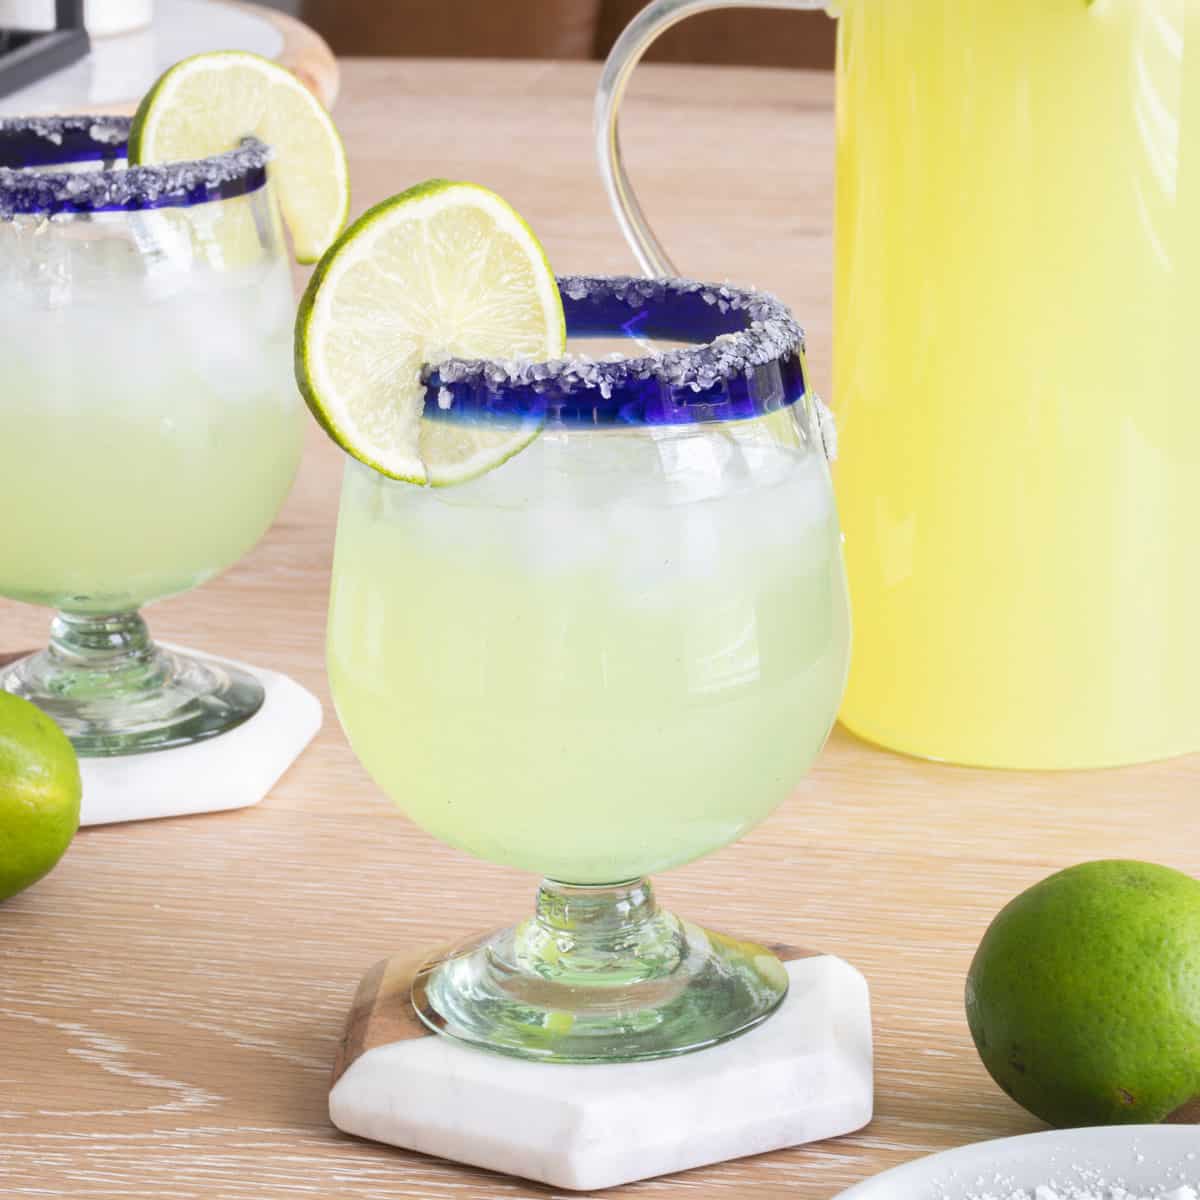 Pitcher Style Margaritas for a Crowd Recipe - Pinch of Yum